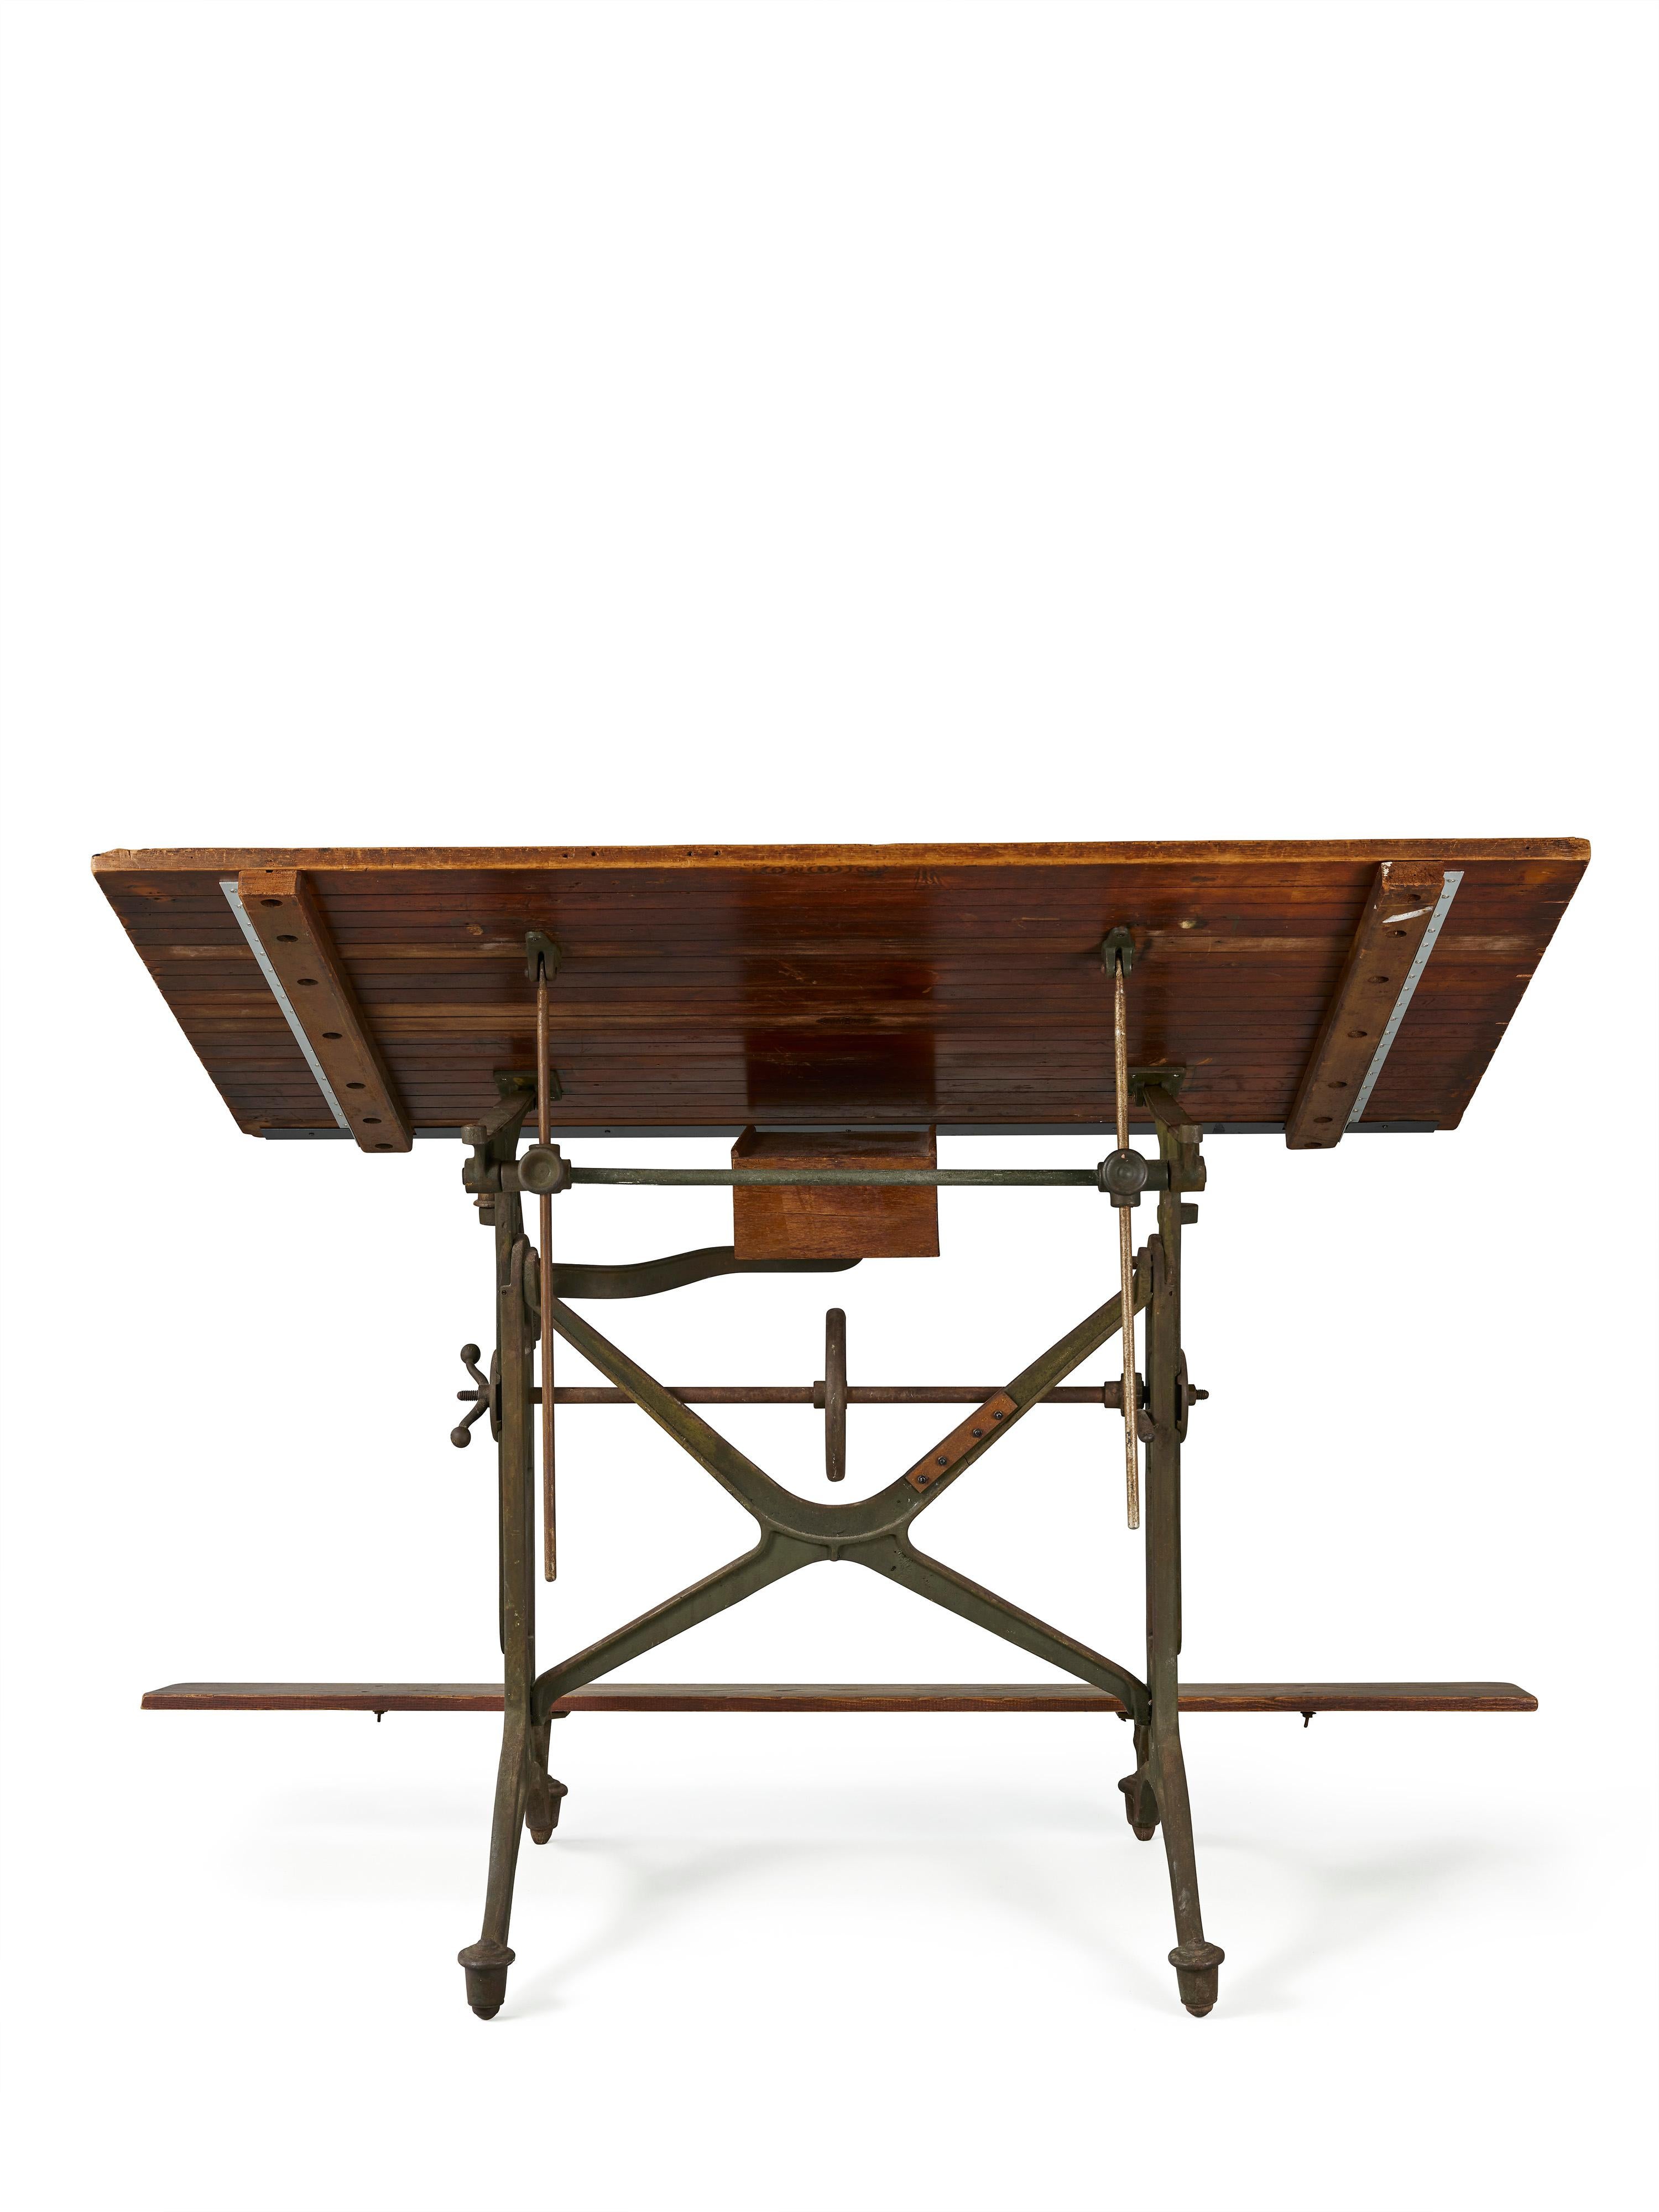 Cast Original Keuffel and Esser Drafting Table For Sale